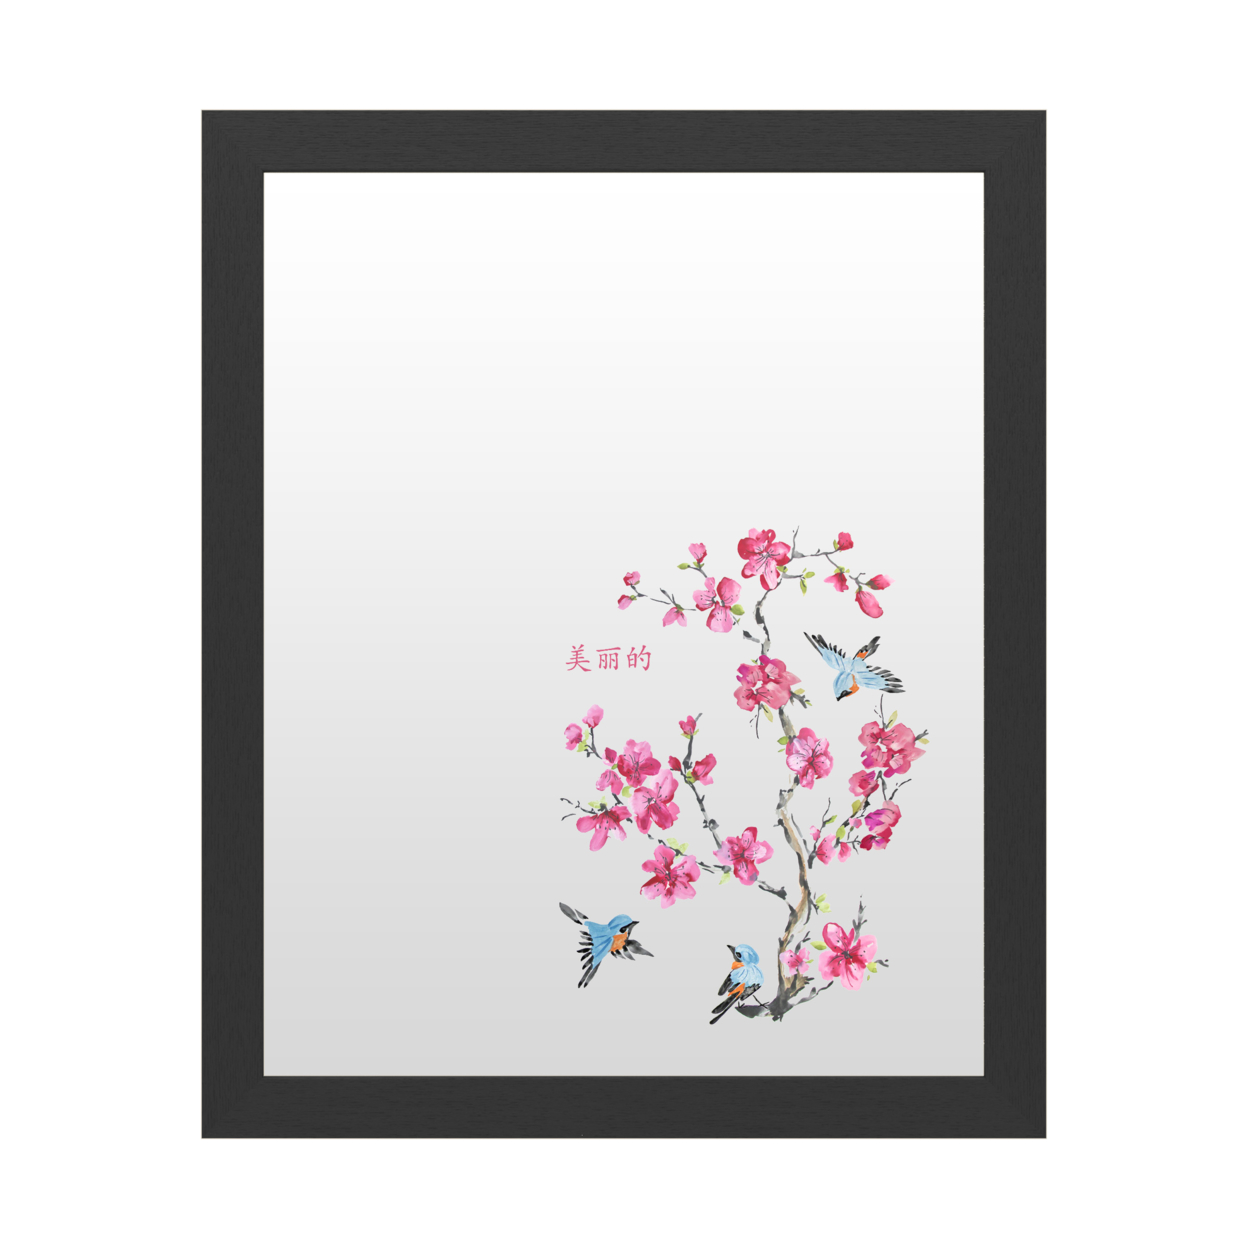 Dry Erase 16 X 20 Marker Board With Printed Artwork - Jean Plout Cherry Blossom Beautiful Birds White Board - Ready To Hang